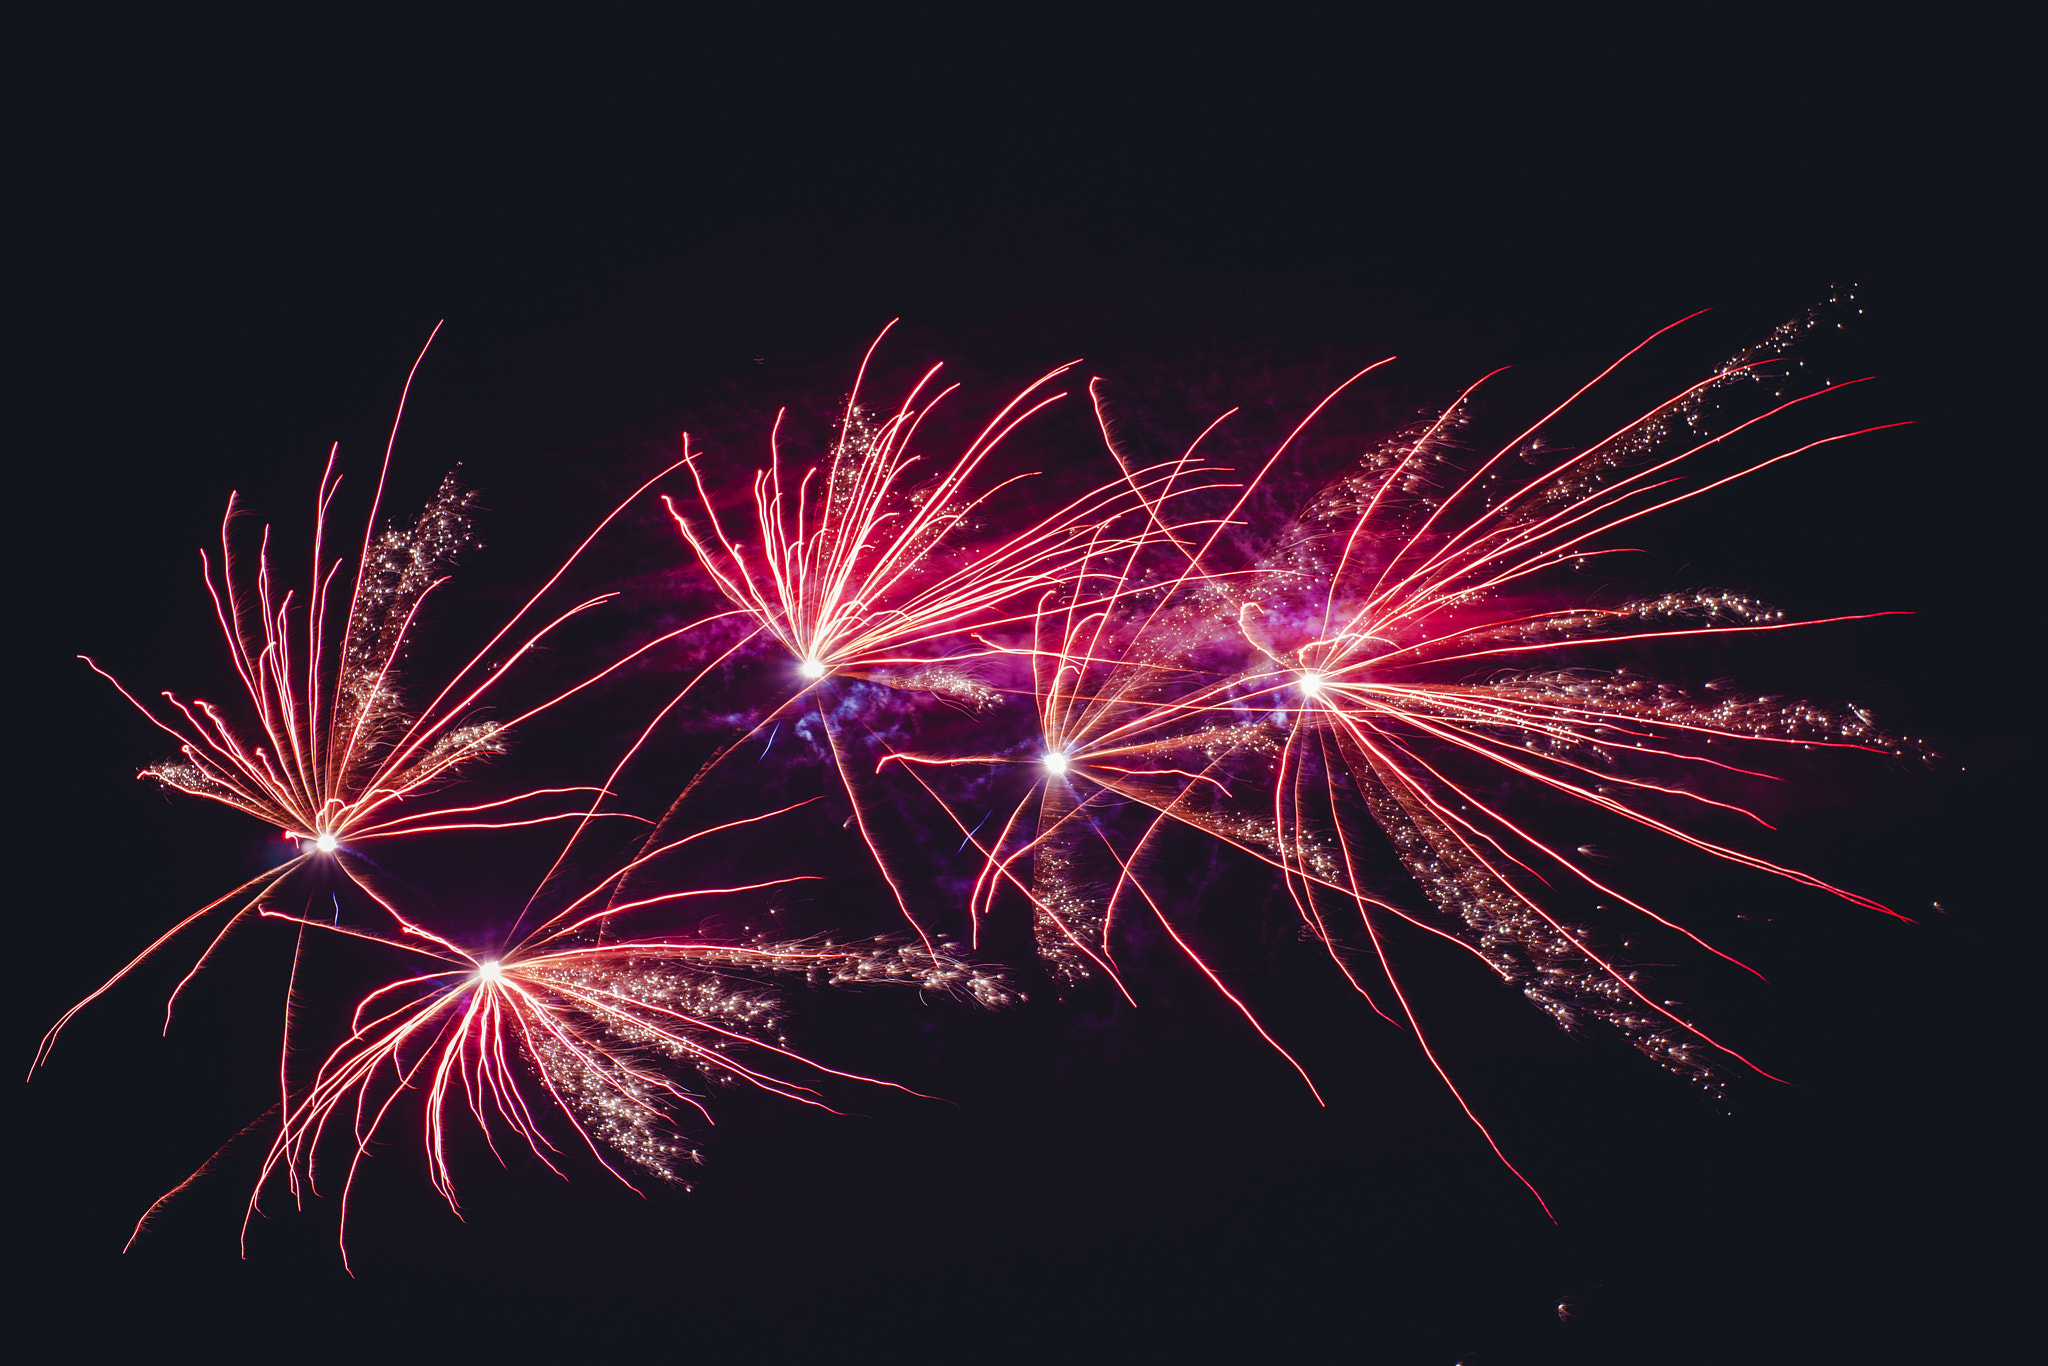 Sony Alpha DSLR-A900 sample photo. Fireworks exploding in violet colors photography